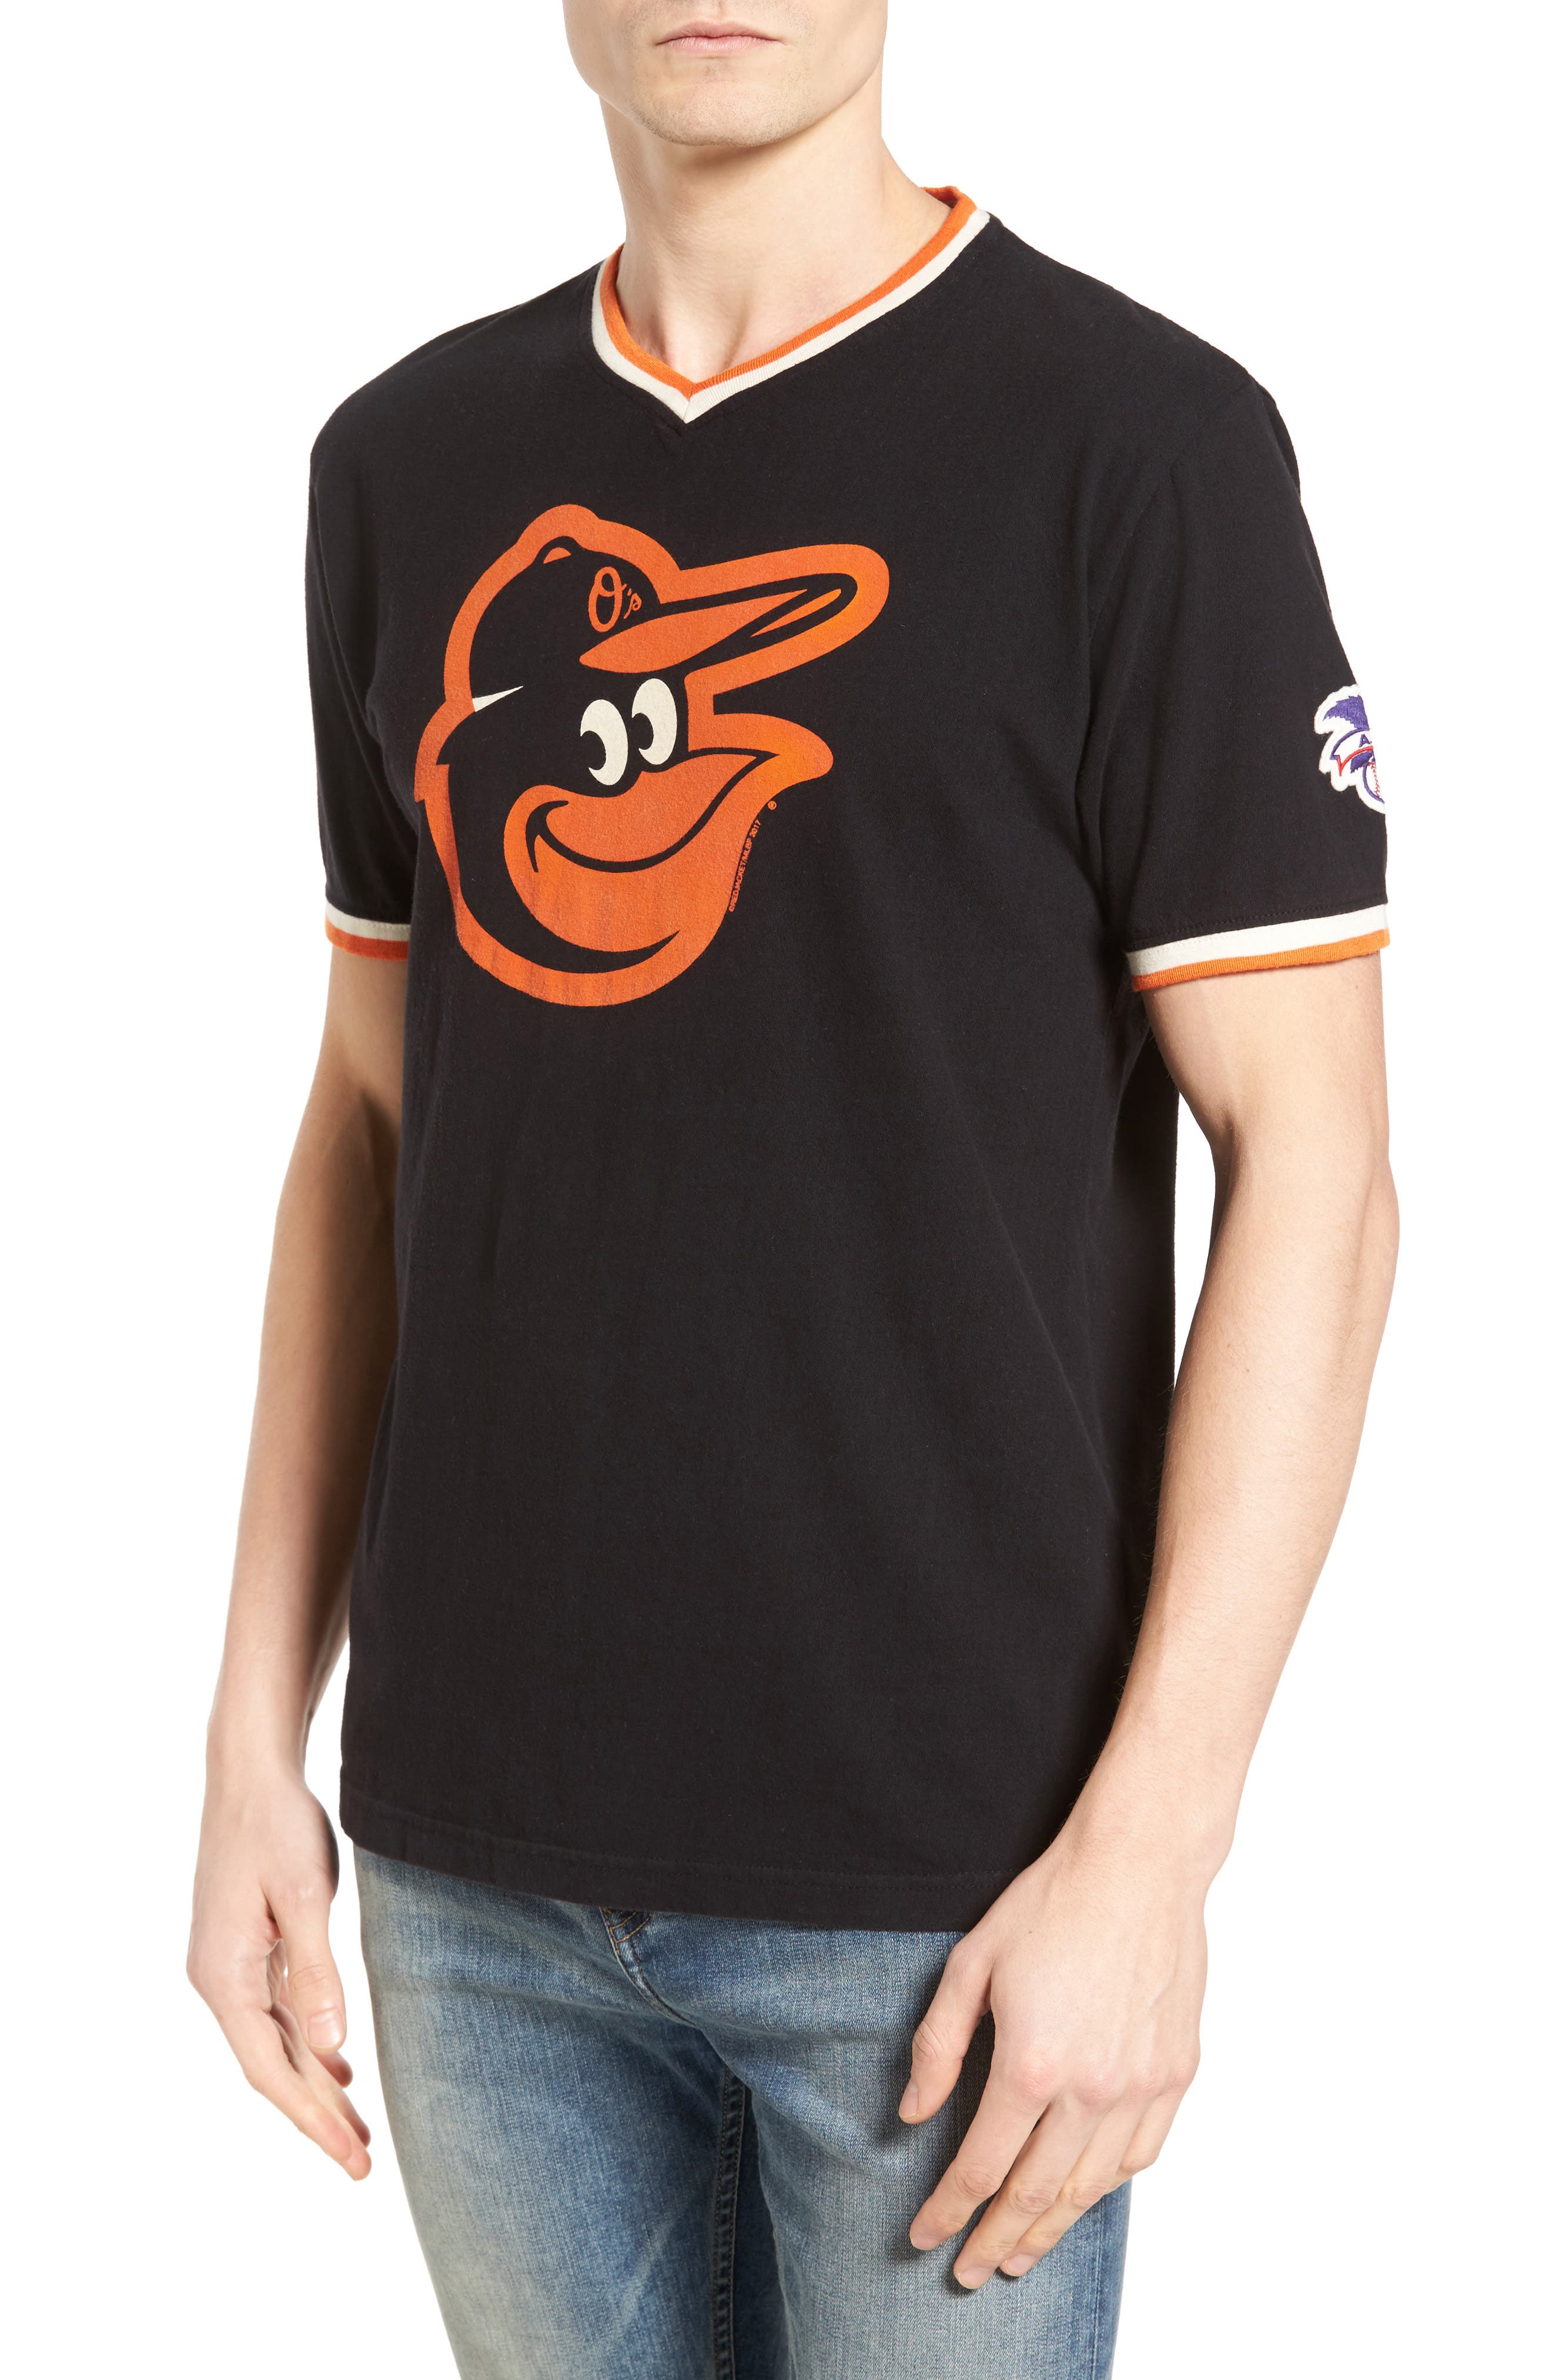 orioles t shirts for women